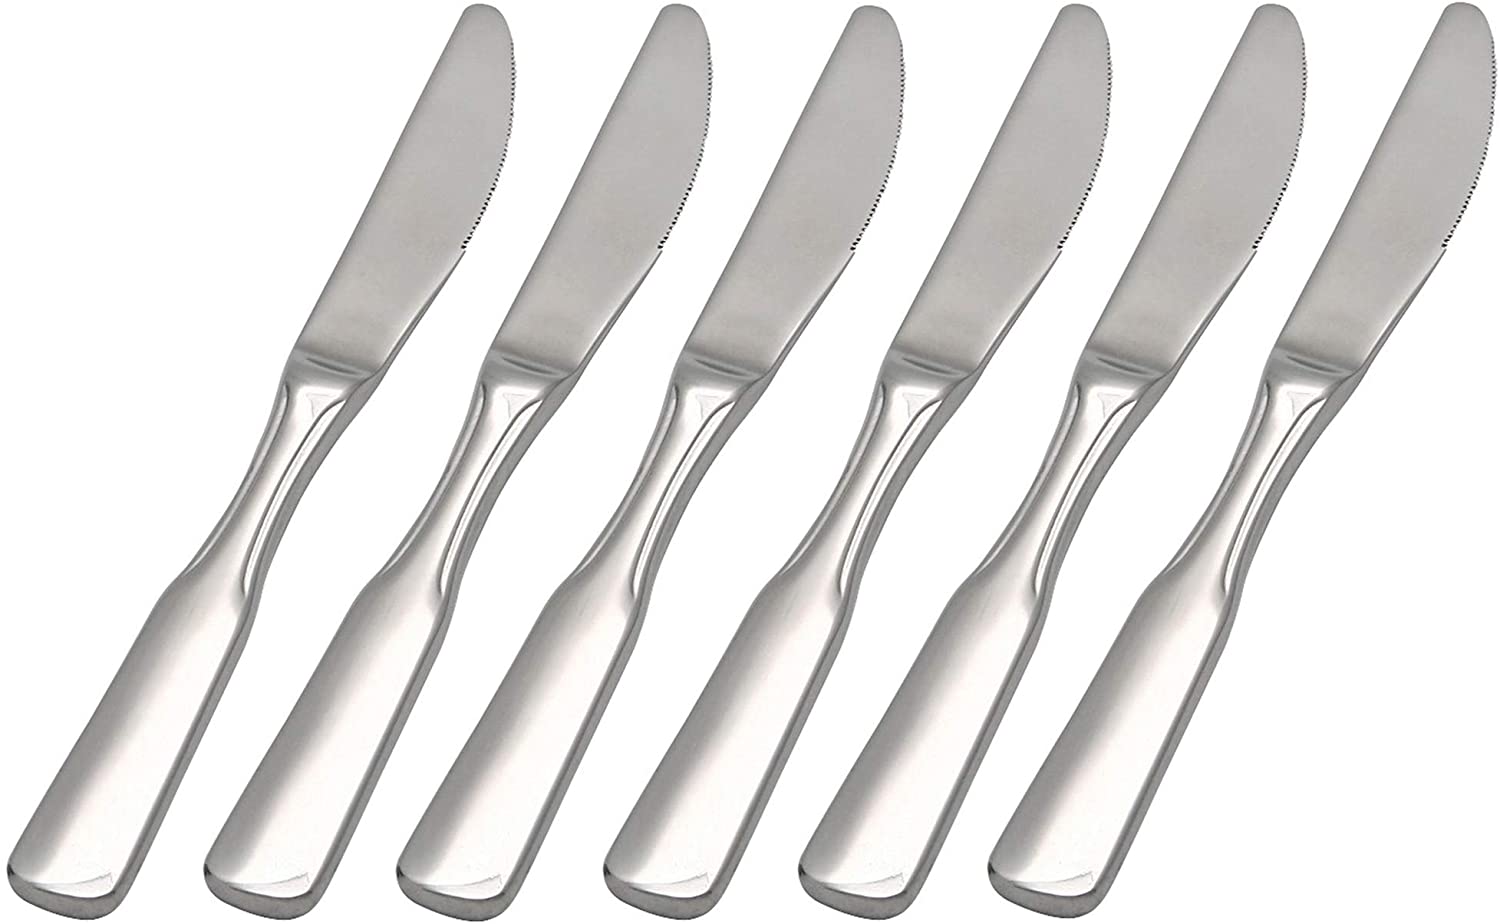 GRAWE GRÄWE Dessert knives made of stainless steel, set of 6, dinner knives with serrated edge, polished, dishwasher-safe - Spaten series